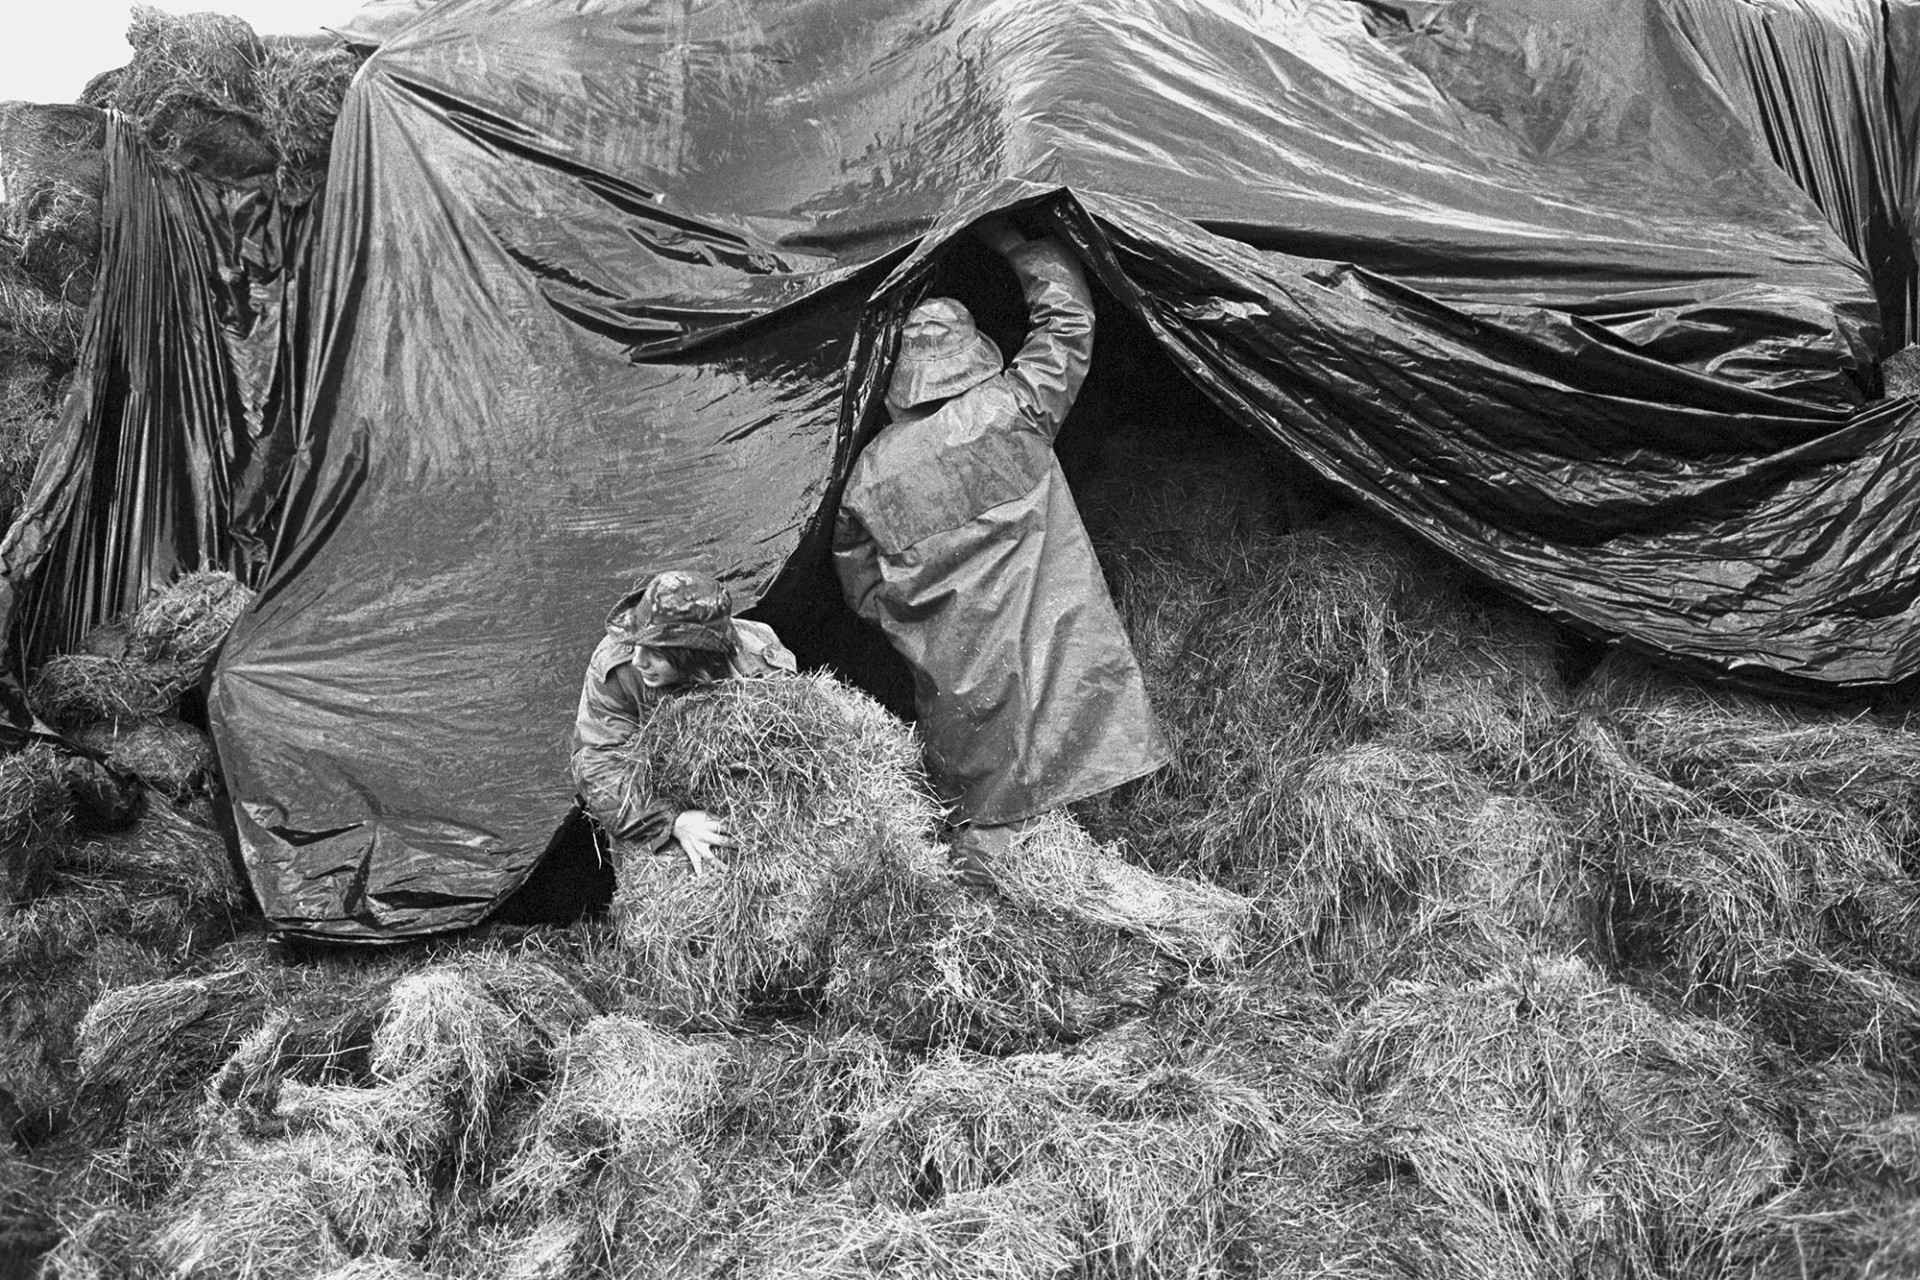 Loading hay in muddy farmyard, polythene cover.
[A boy helping his father load hay onto a trailer to take to feed cattle at Lower Hewton, Okehampton. The hay is covered by a polythene sheet.]